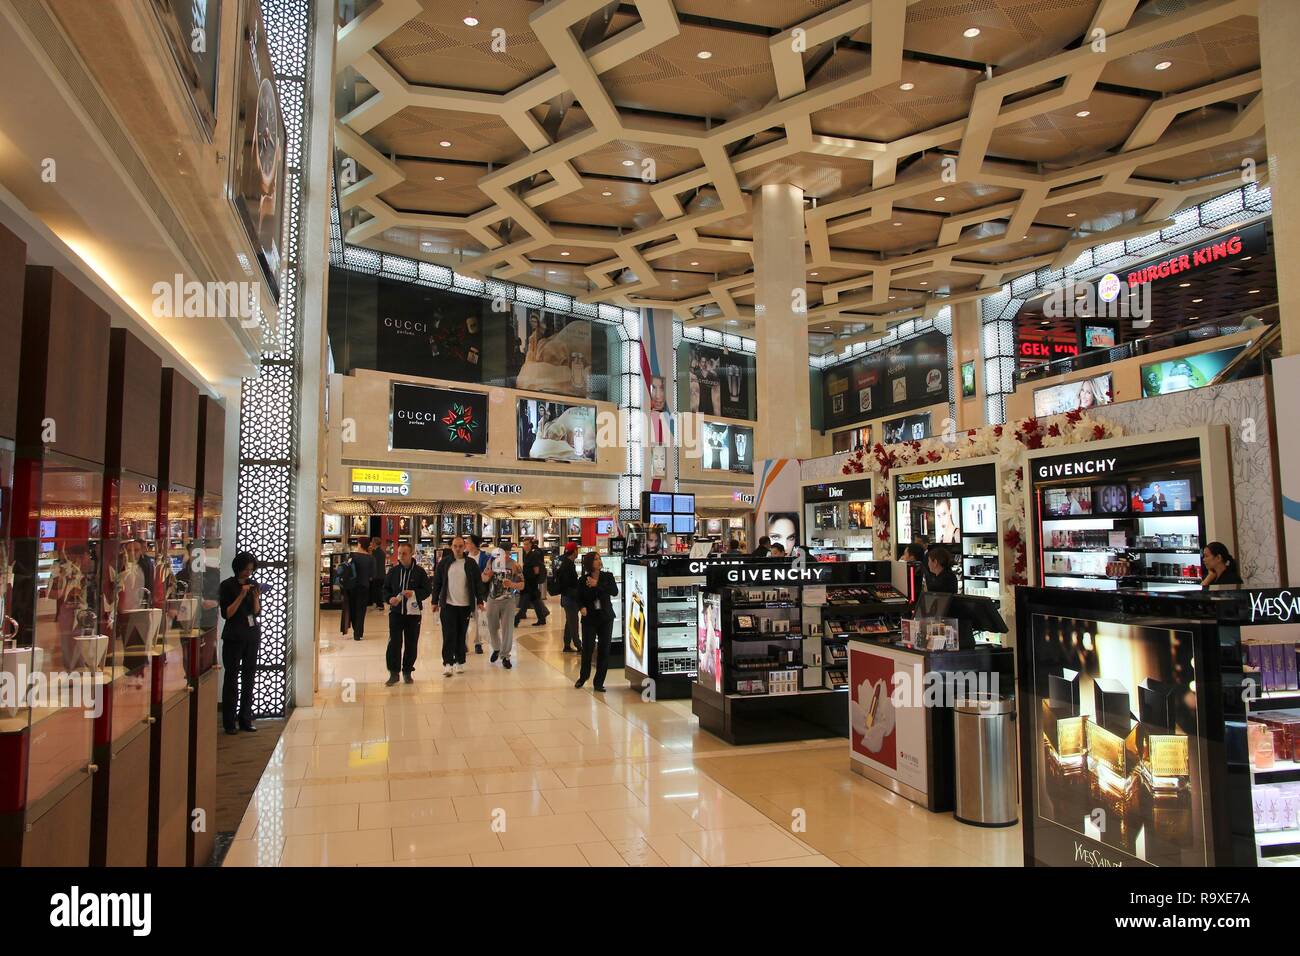 what to buy in abu dhabi airport｜TikTok Search